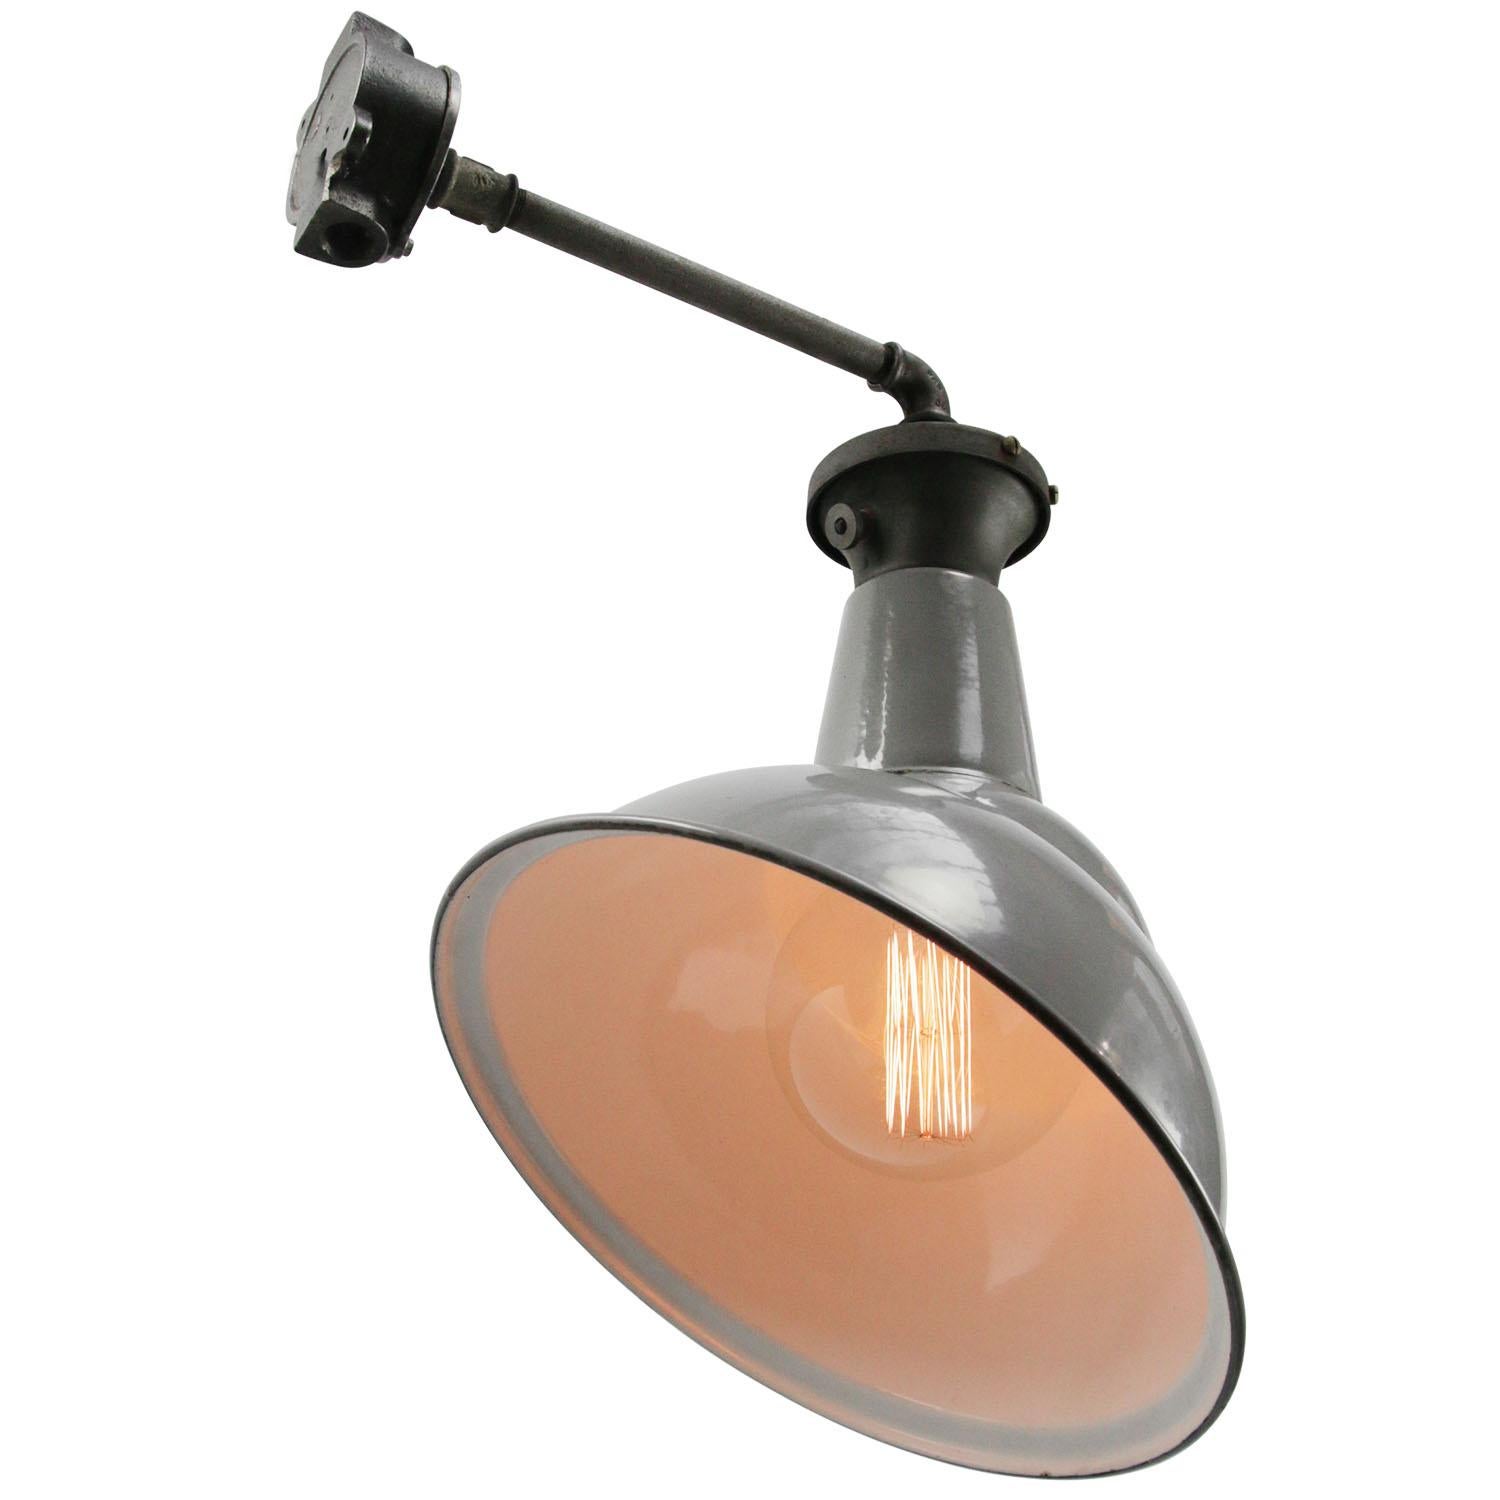 Vintage industrial wall light by Benjamin, UK
Gray enamel, cast iron top and wall base

diameter wall mount 10 cm

E27/E26

Weight: 3.00 kg / 6.6 lb

Priced per individual item. All lamps have been made suitable by international standards